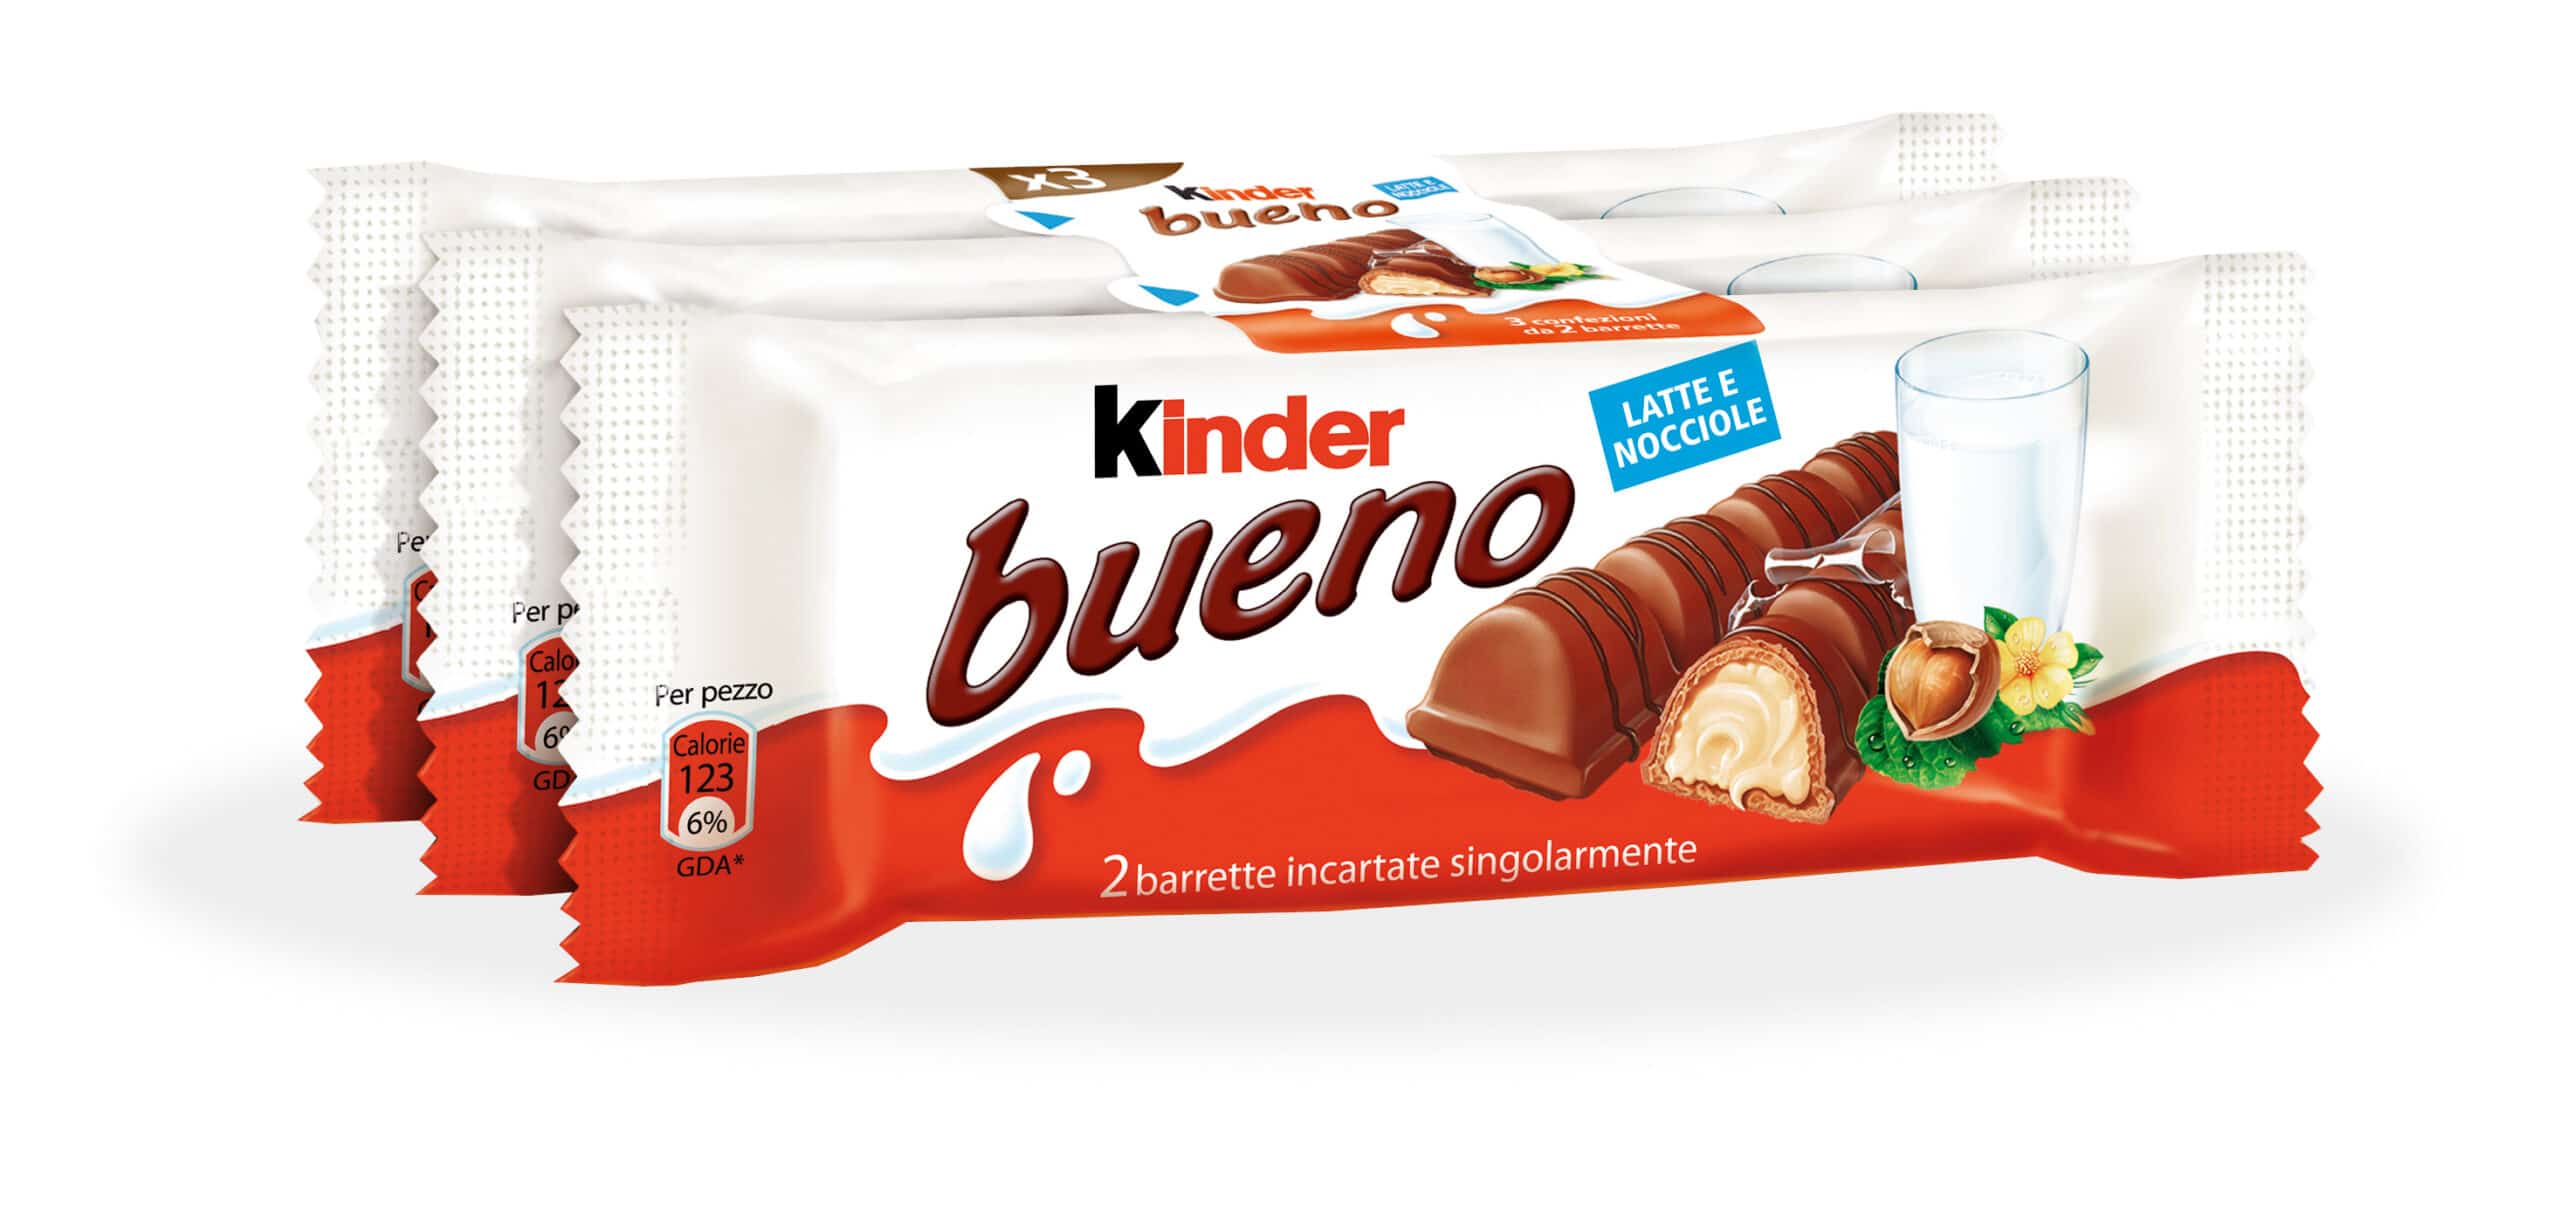 Ferrero: Kinder Bueno 3pz chocolate Italy” – from Wide Terra “Imported World